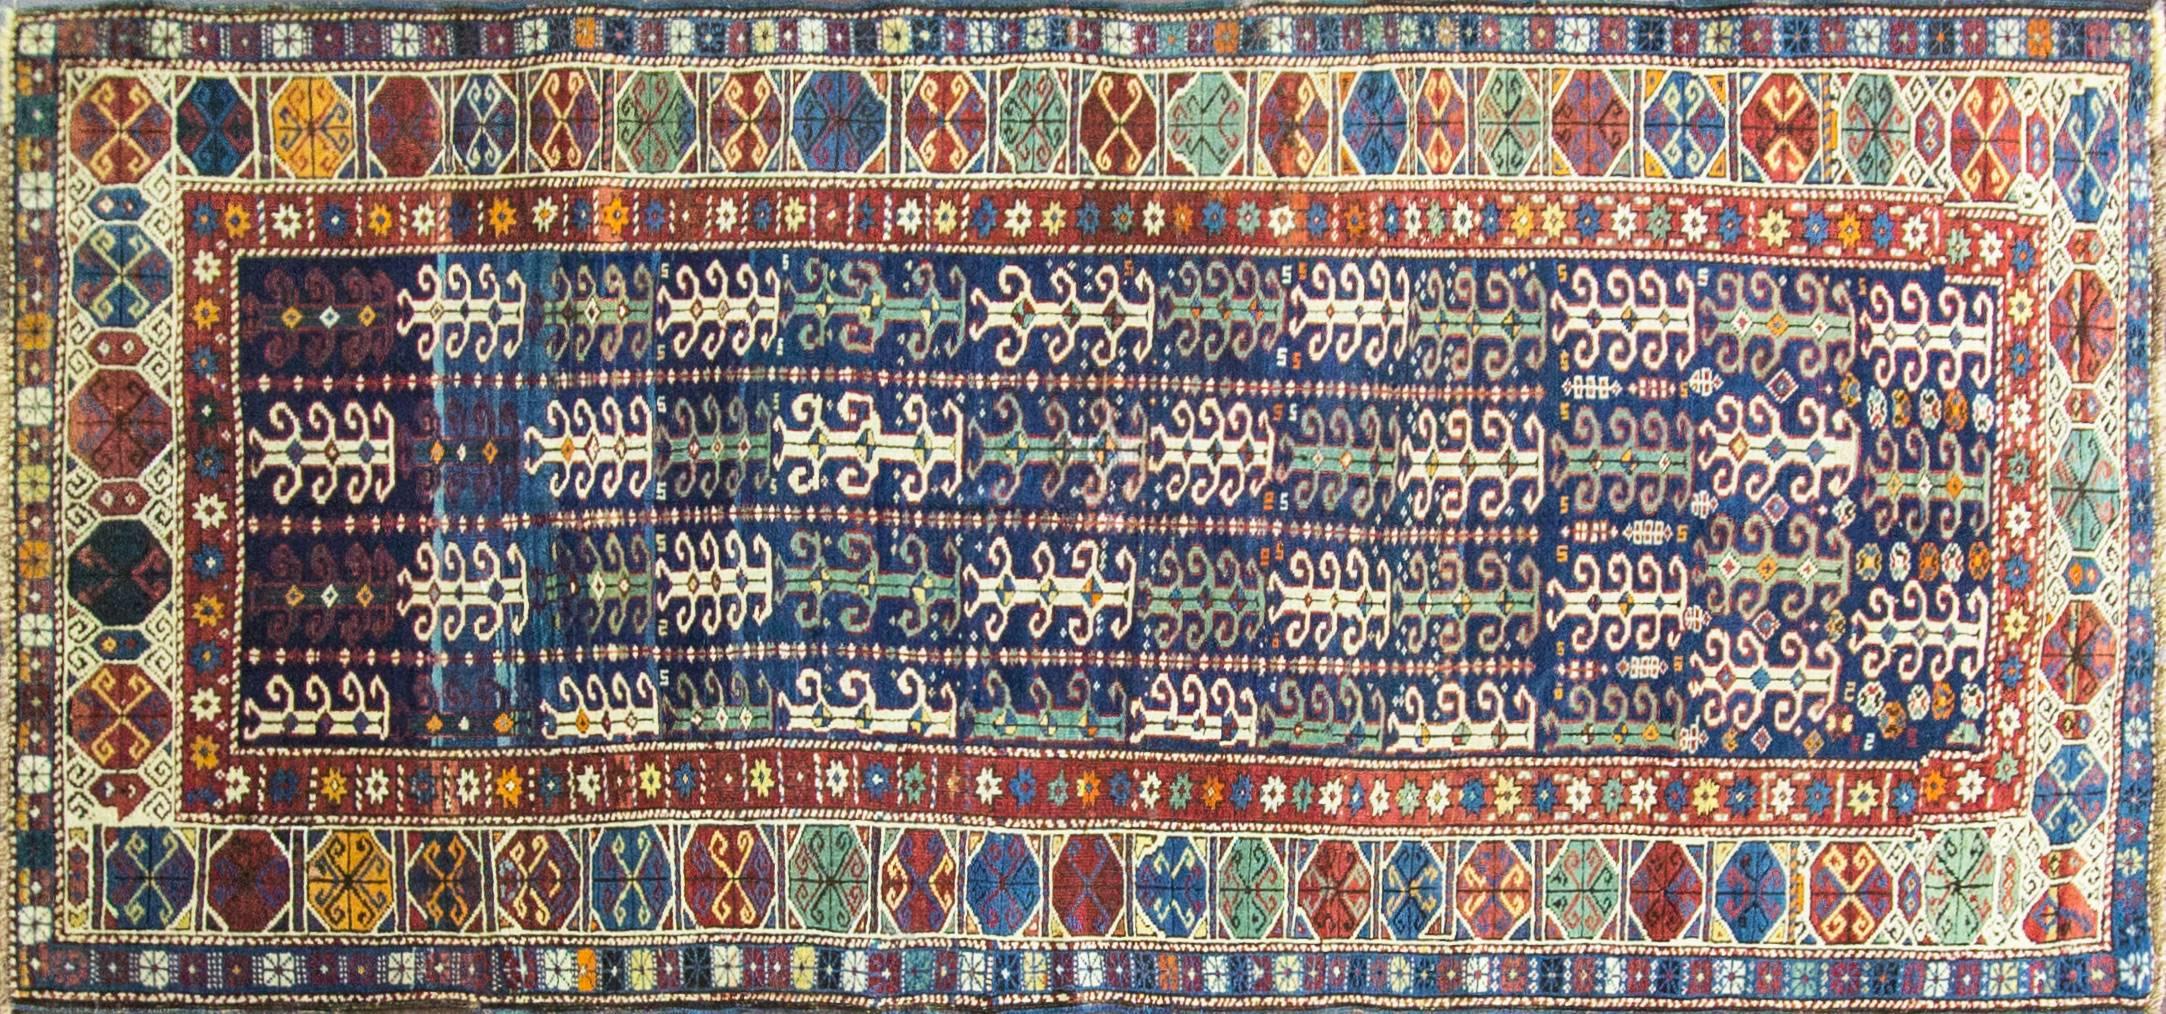 Highly unusual design antique colorful long Kazak rug.
The Caucasus is bounded by the rugged mountains and lush valleys of Armenia, Azerbaijan and Georgia. This cultural melting pot was populated by Armenian dyers and weavers, Azeri Turks, groups